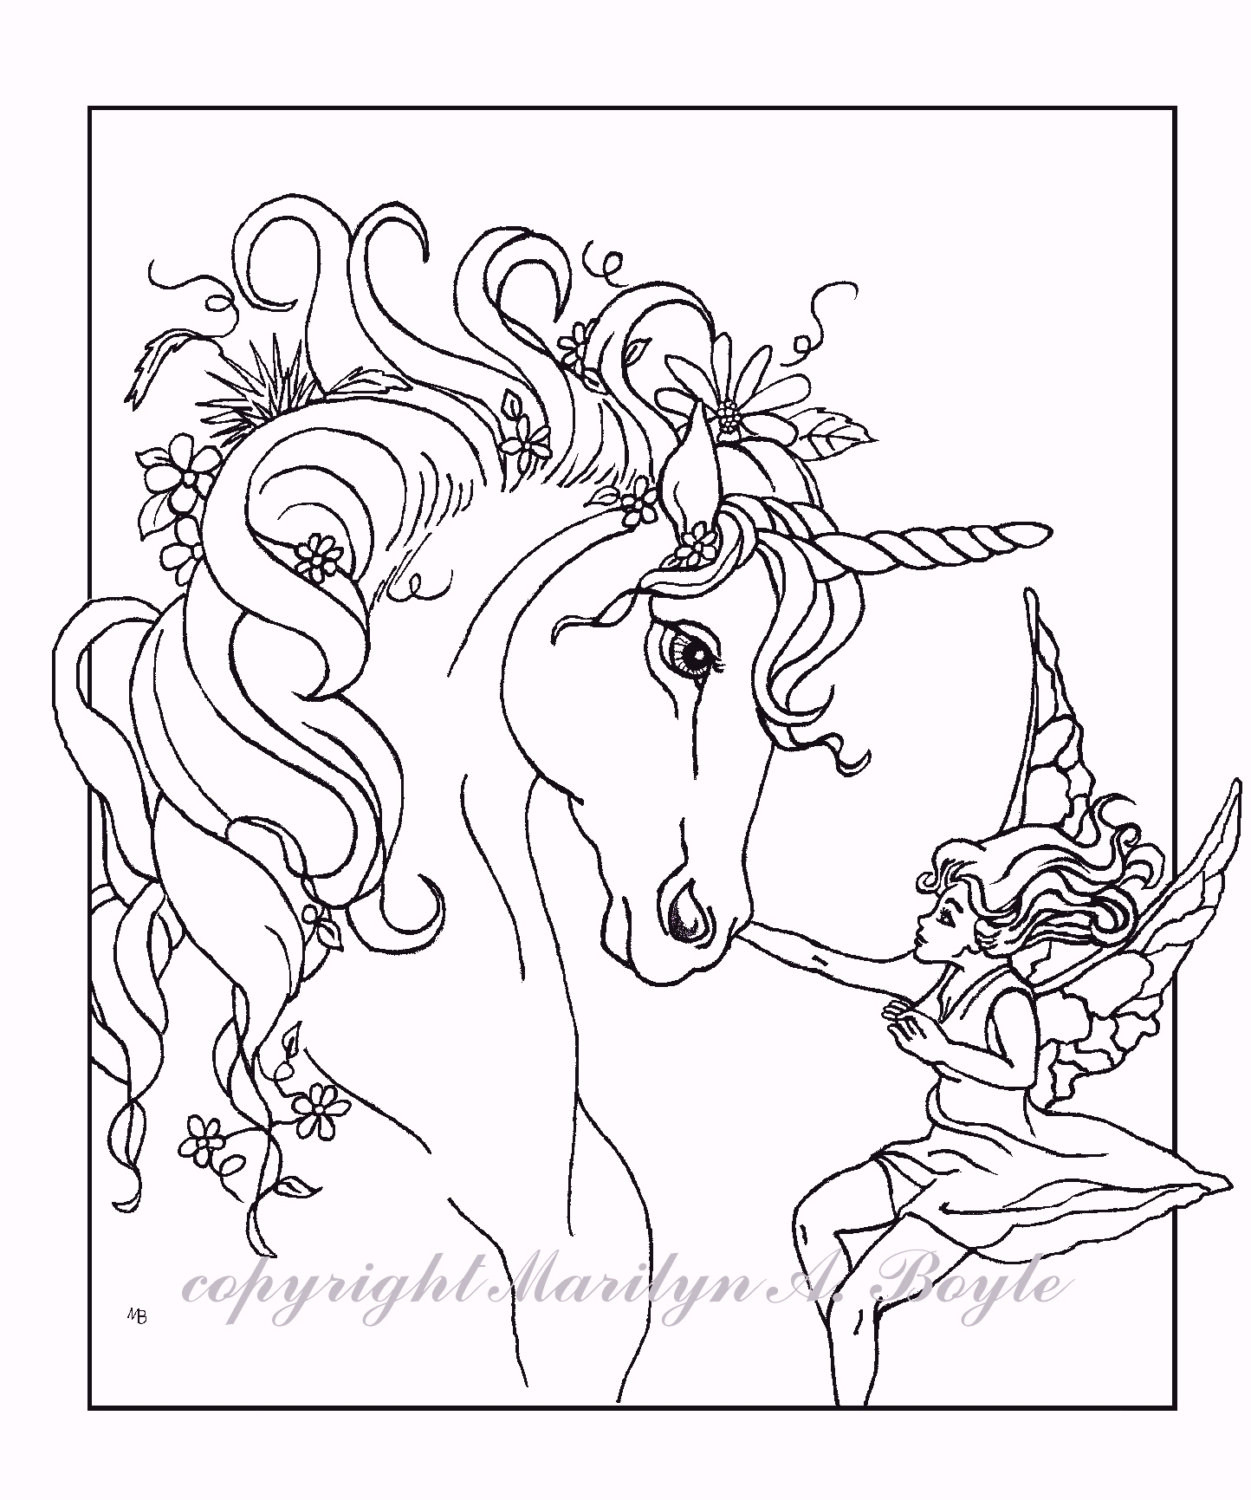 Unicorn Coloring Pages For Adults
 ADULT COLORING PAGE fantasy unicorn fairy digital